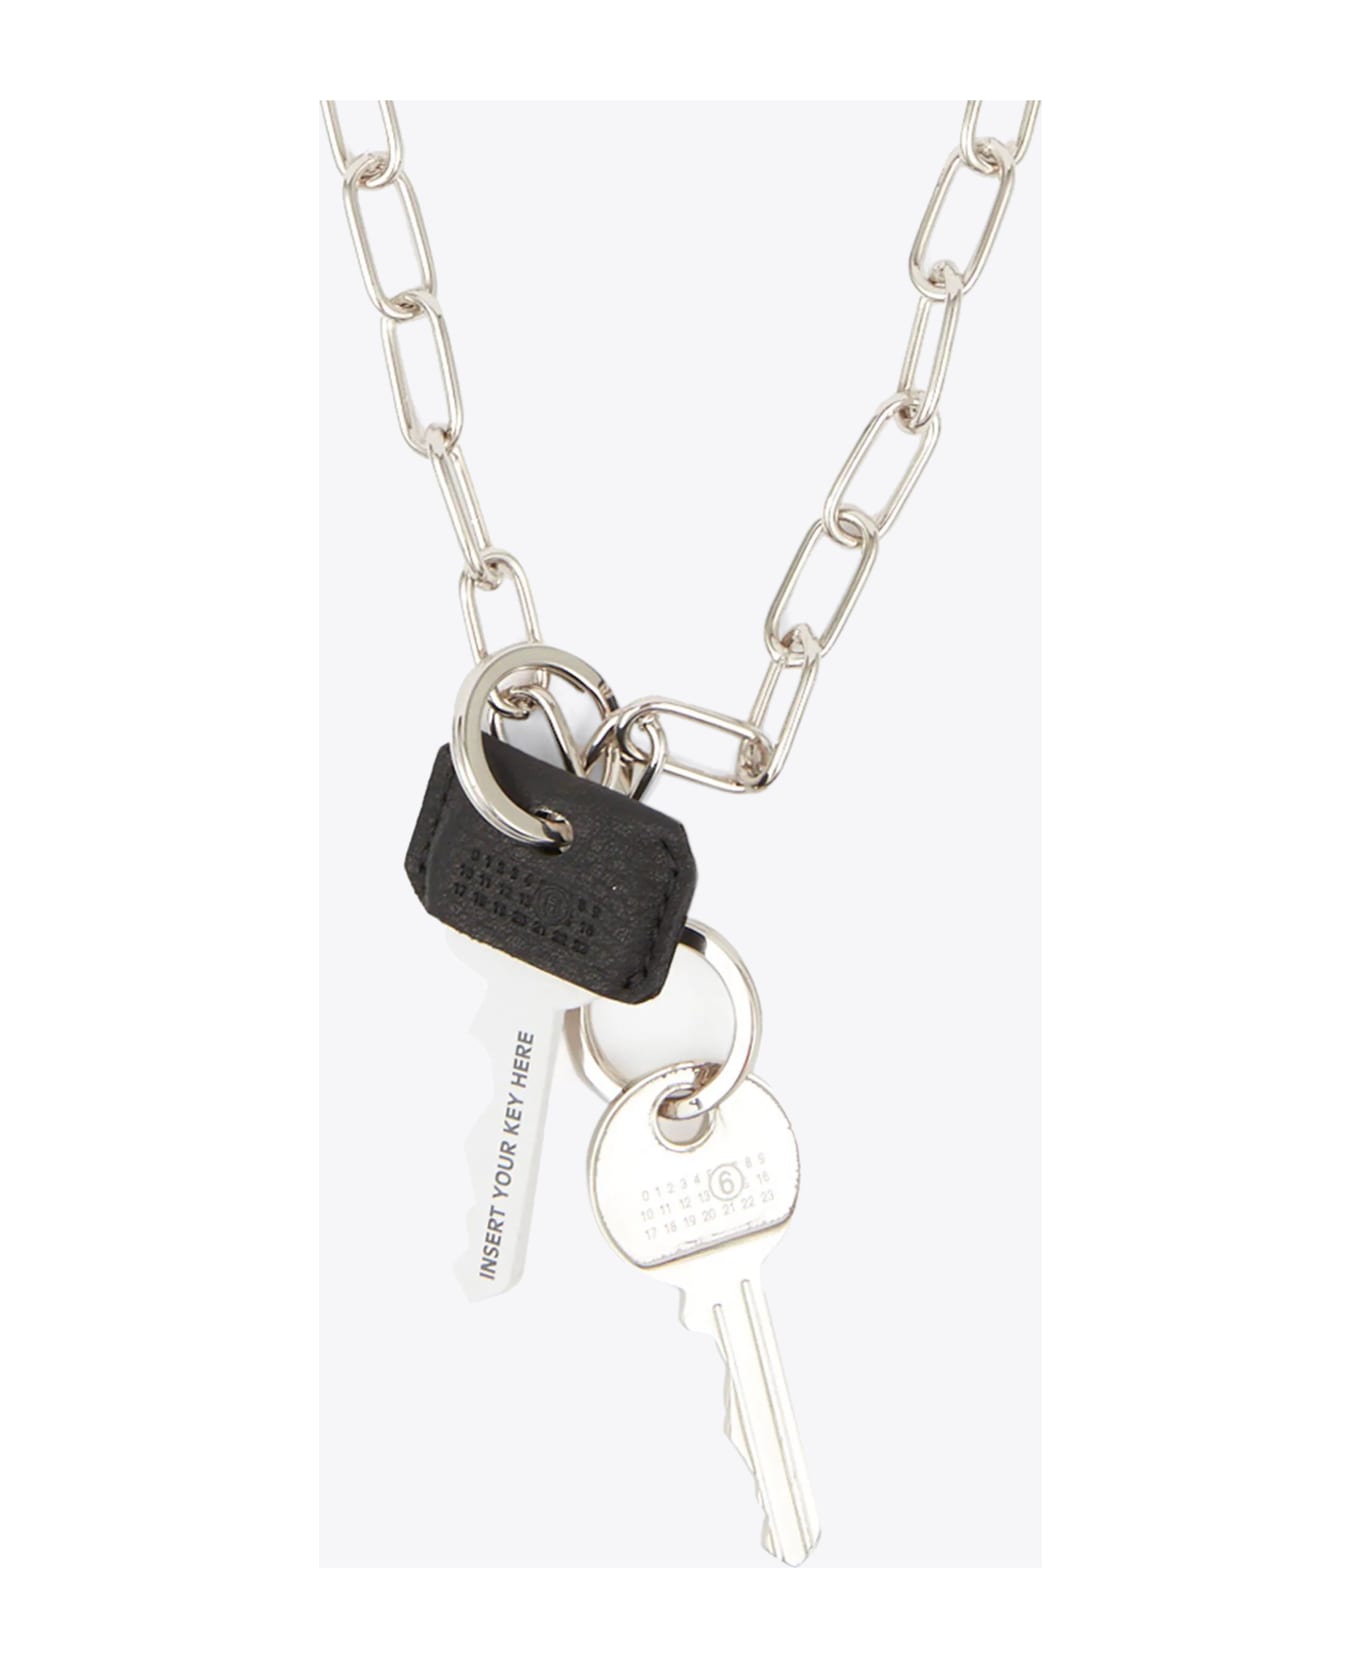 MM6 Maison Margiela Collana Silver metal chain necklace with keys - Argento